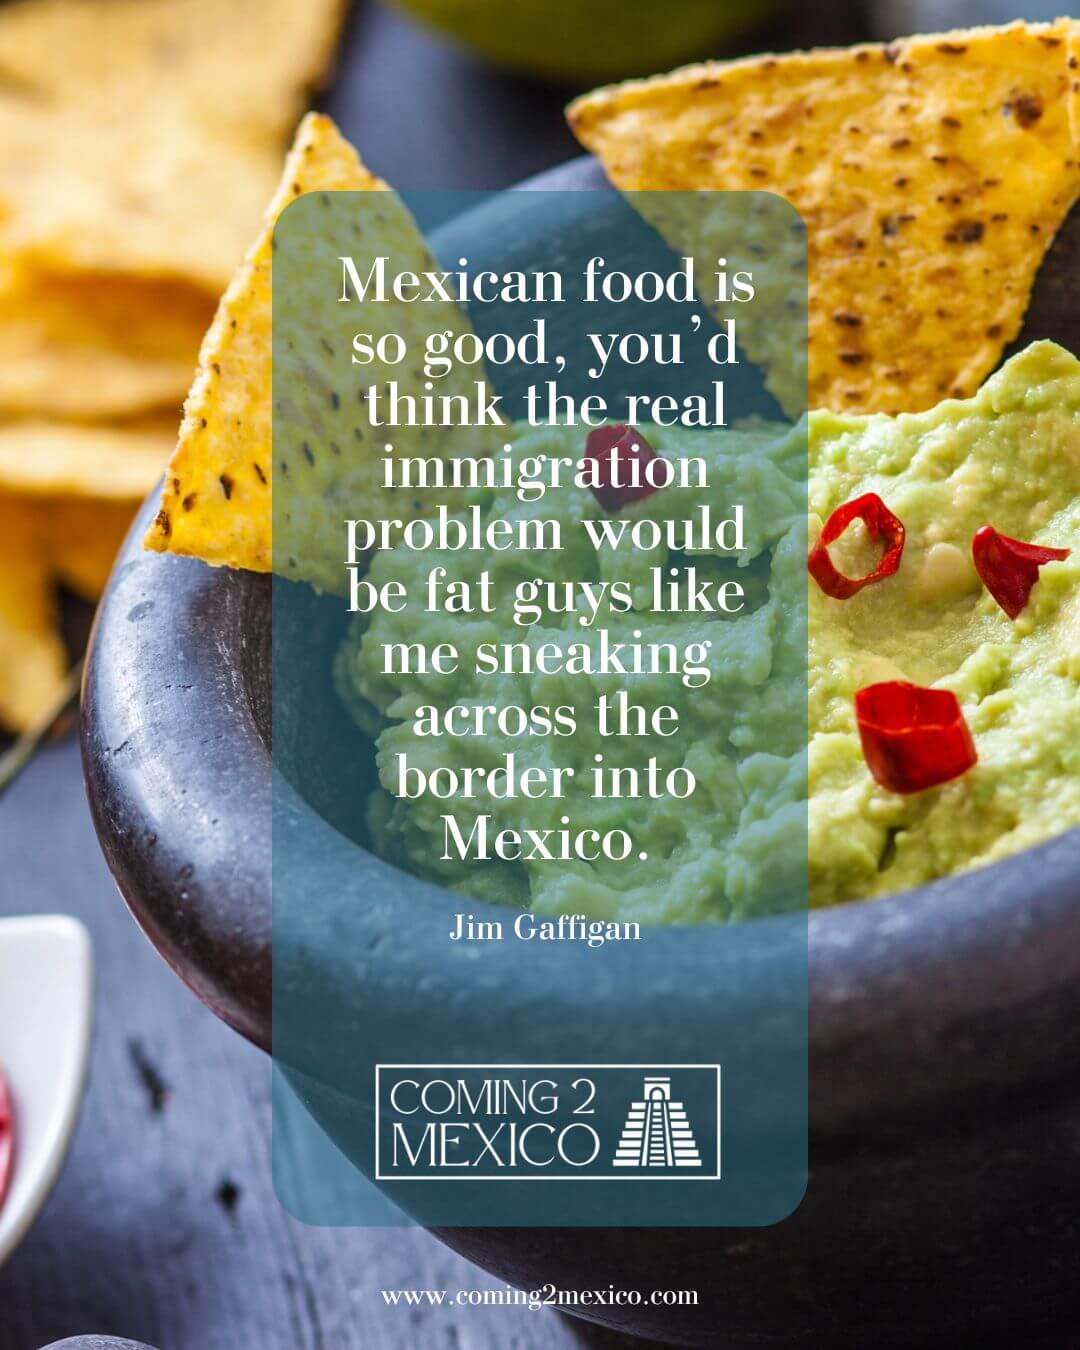 “Mexican food is so good, you’d think the real immigration problem would be fat guys like me sneaking across the border into Mexico.“ - Jim Gaffigan